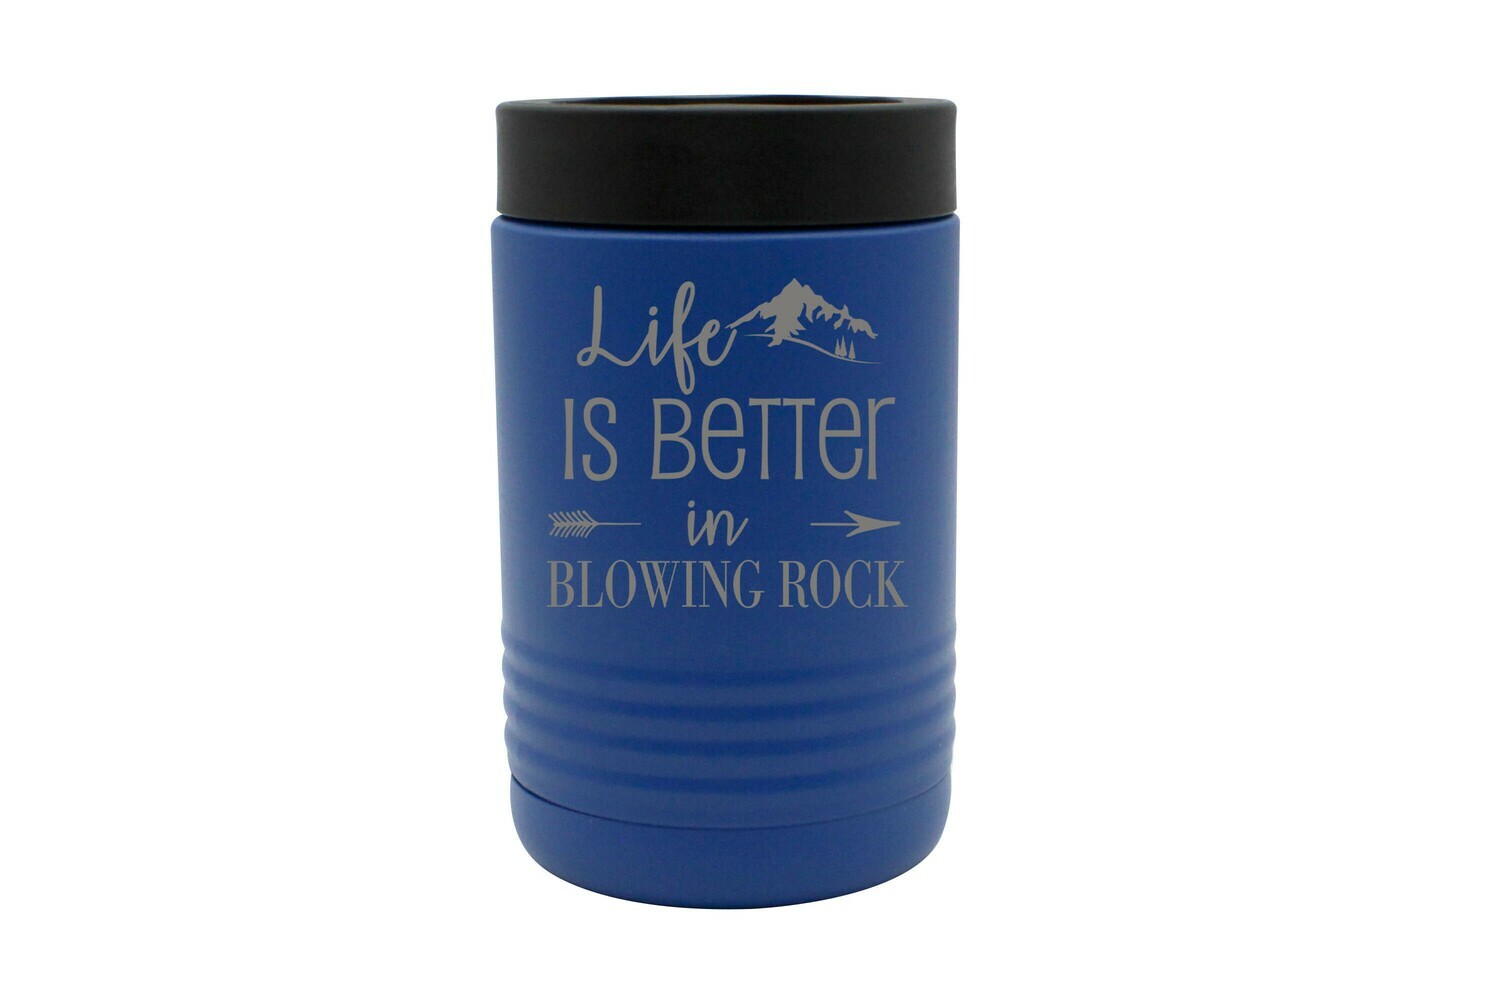 Life is Better Customized with City/Location Insulated Beverage Holder